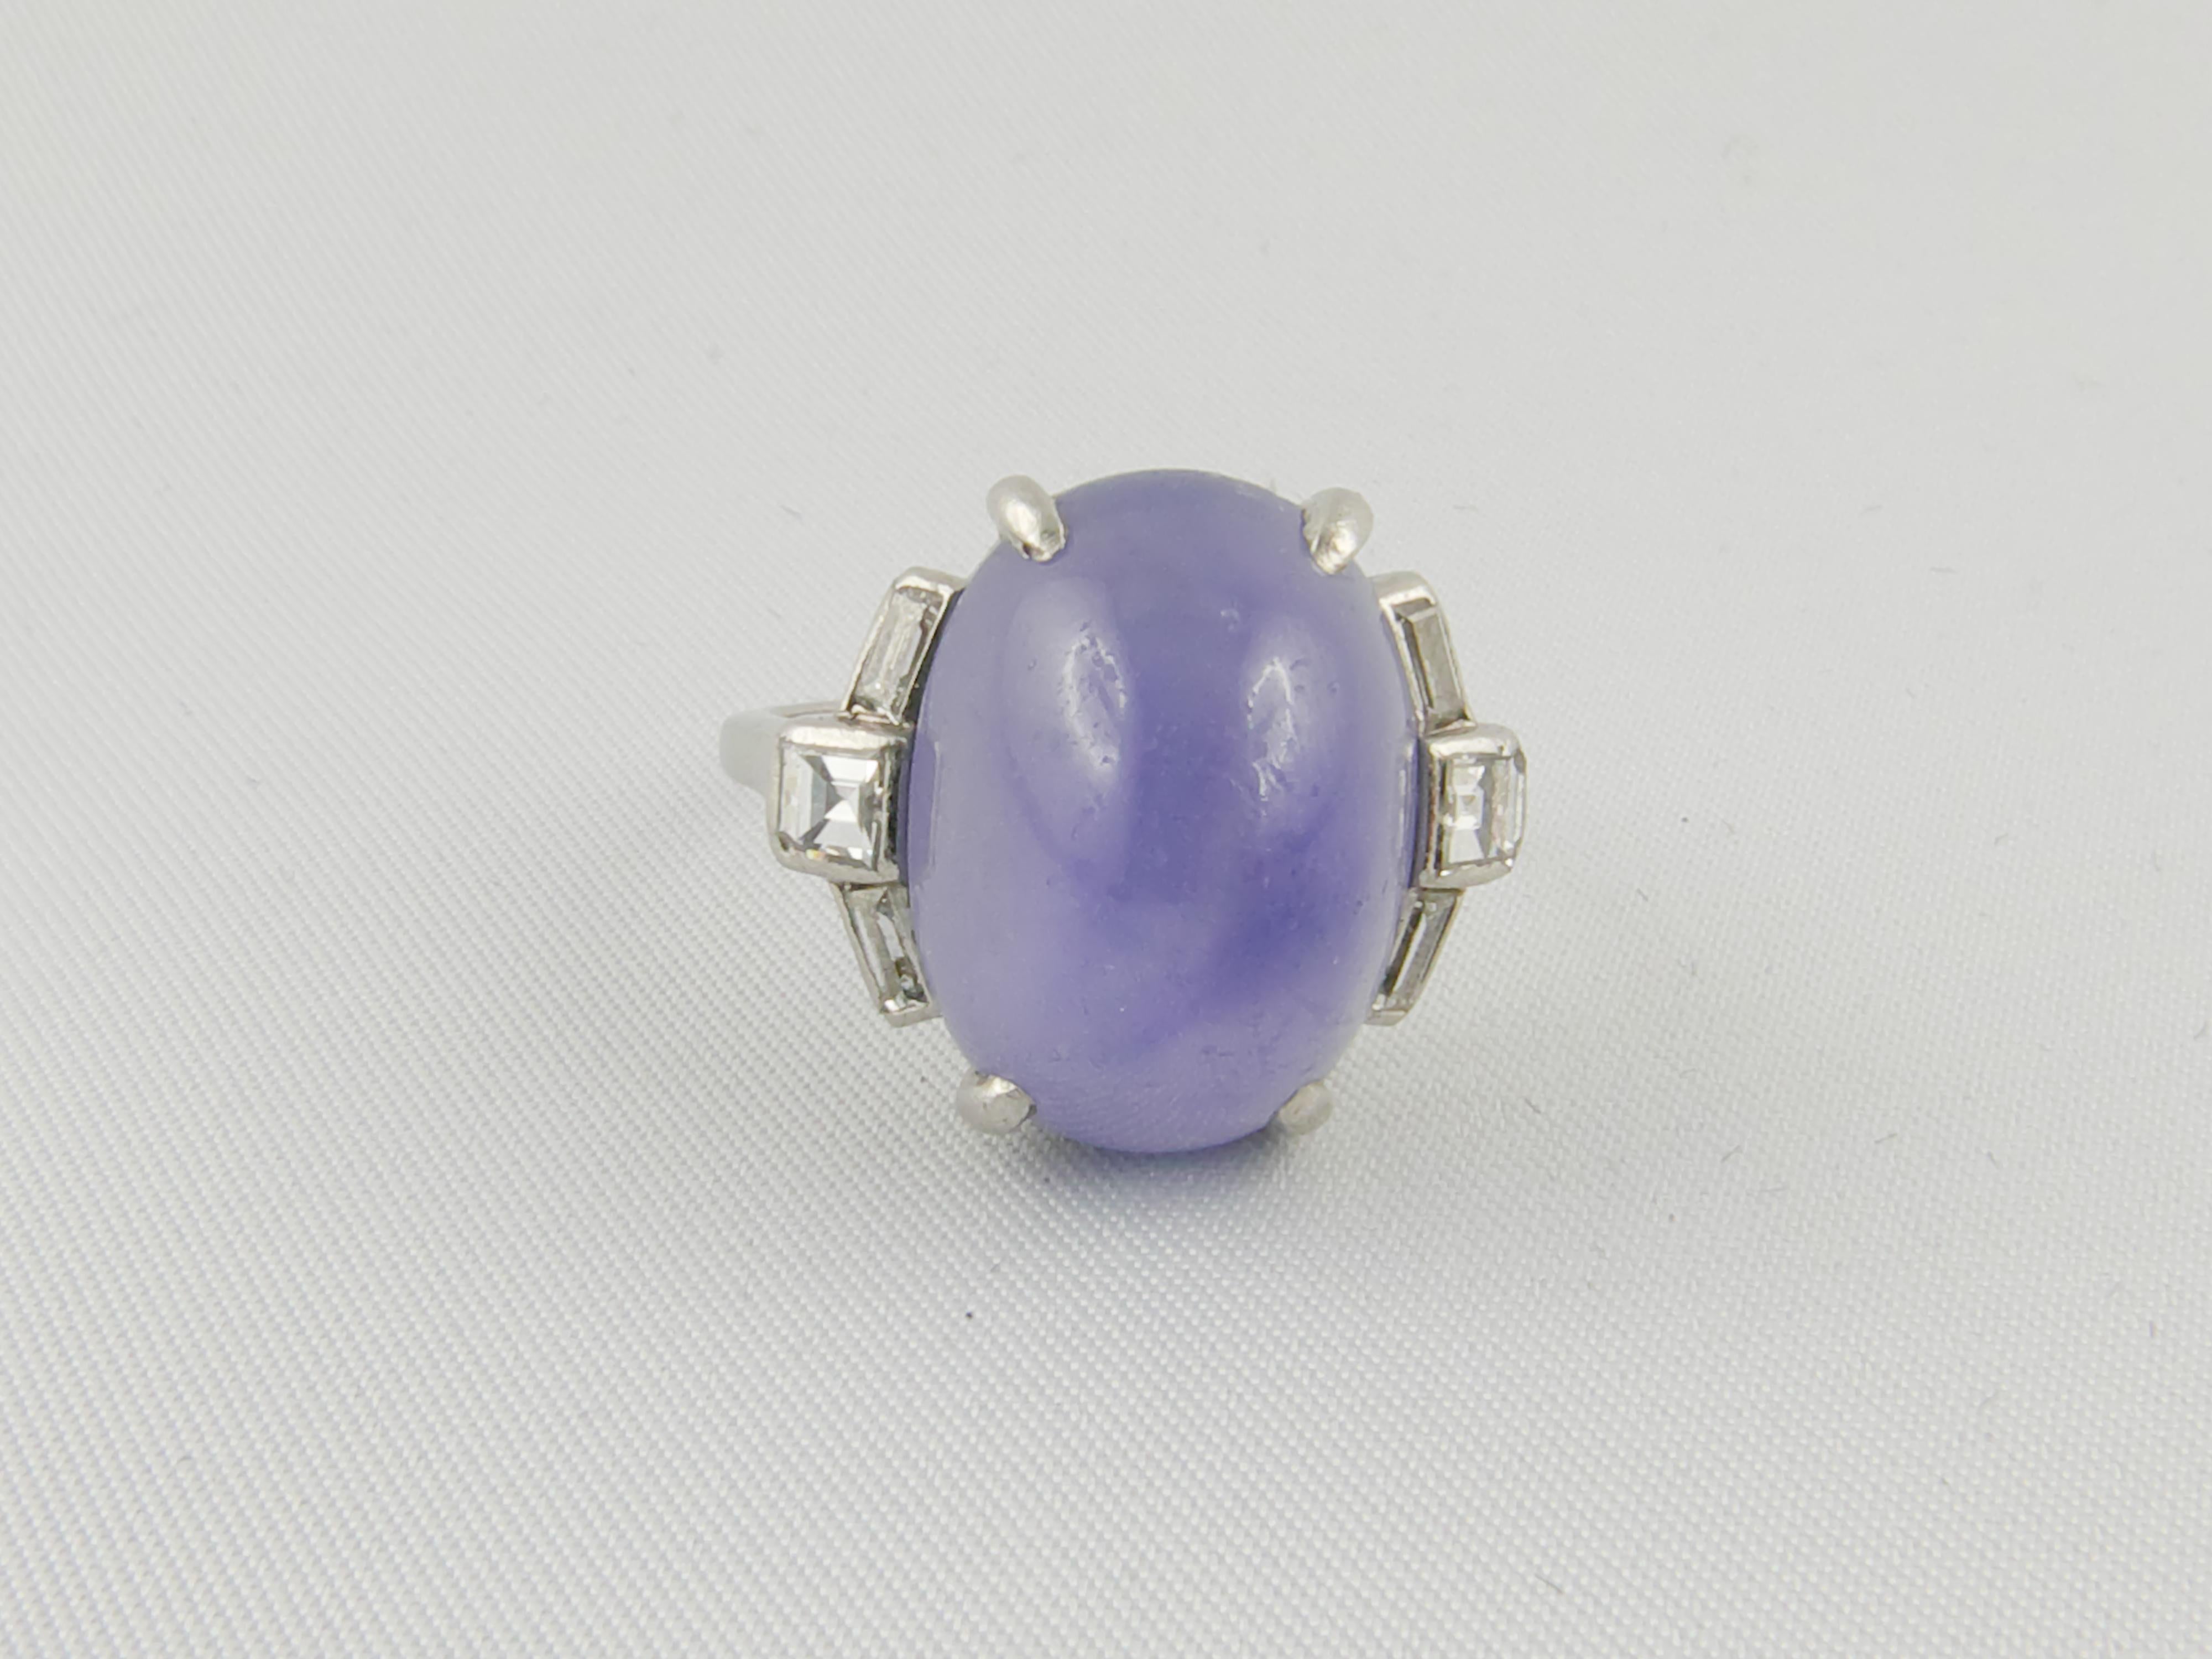 Extremely chic 1920s Art Deco Platinum Star Sapphire and Diamond Ring.
The gorgeous oval shaped Sugar Loaf is a no-heat Ceylon Star Sapphire in a simple four claws Platinum setting, laterally complemented with tapered and squared sparkling